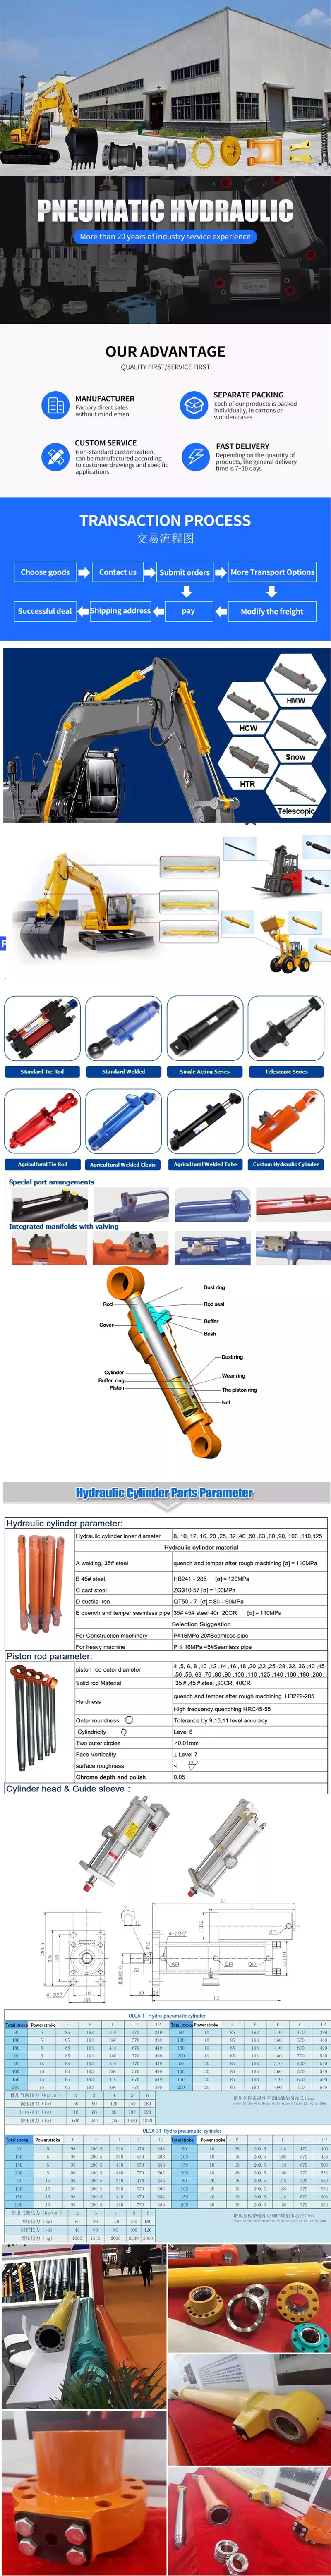 China Best Sales China Superior Hydraulic Cylinder for Trade   vacuum pump belt	